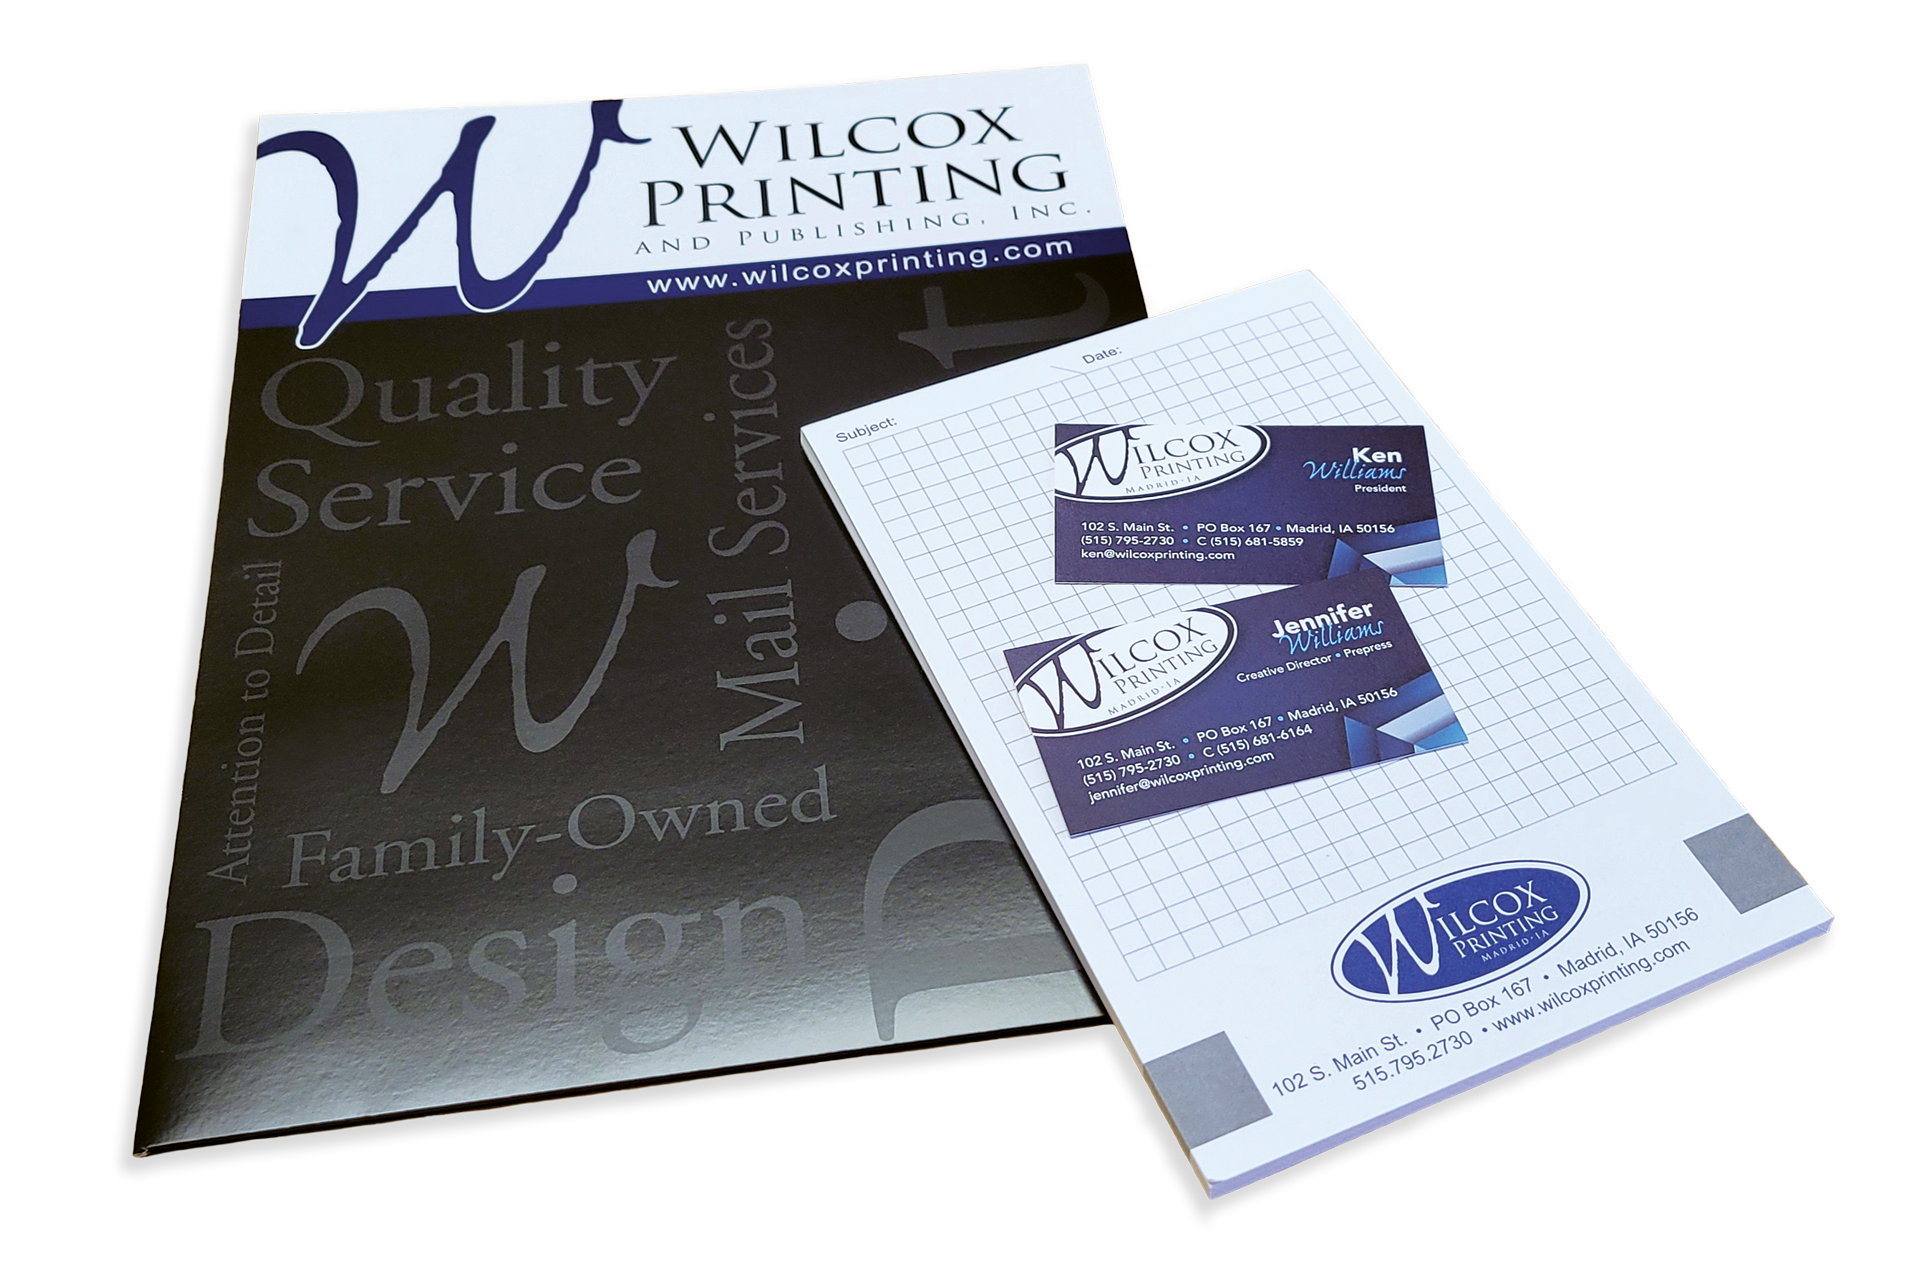 Examples of the WIlcox folder, grid paper, and business cards